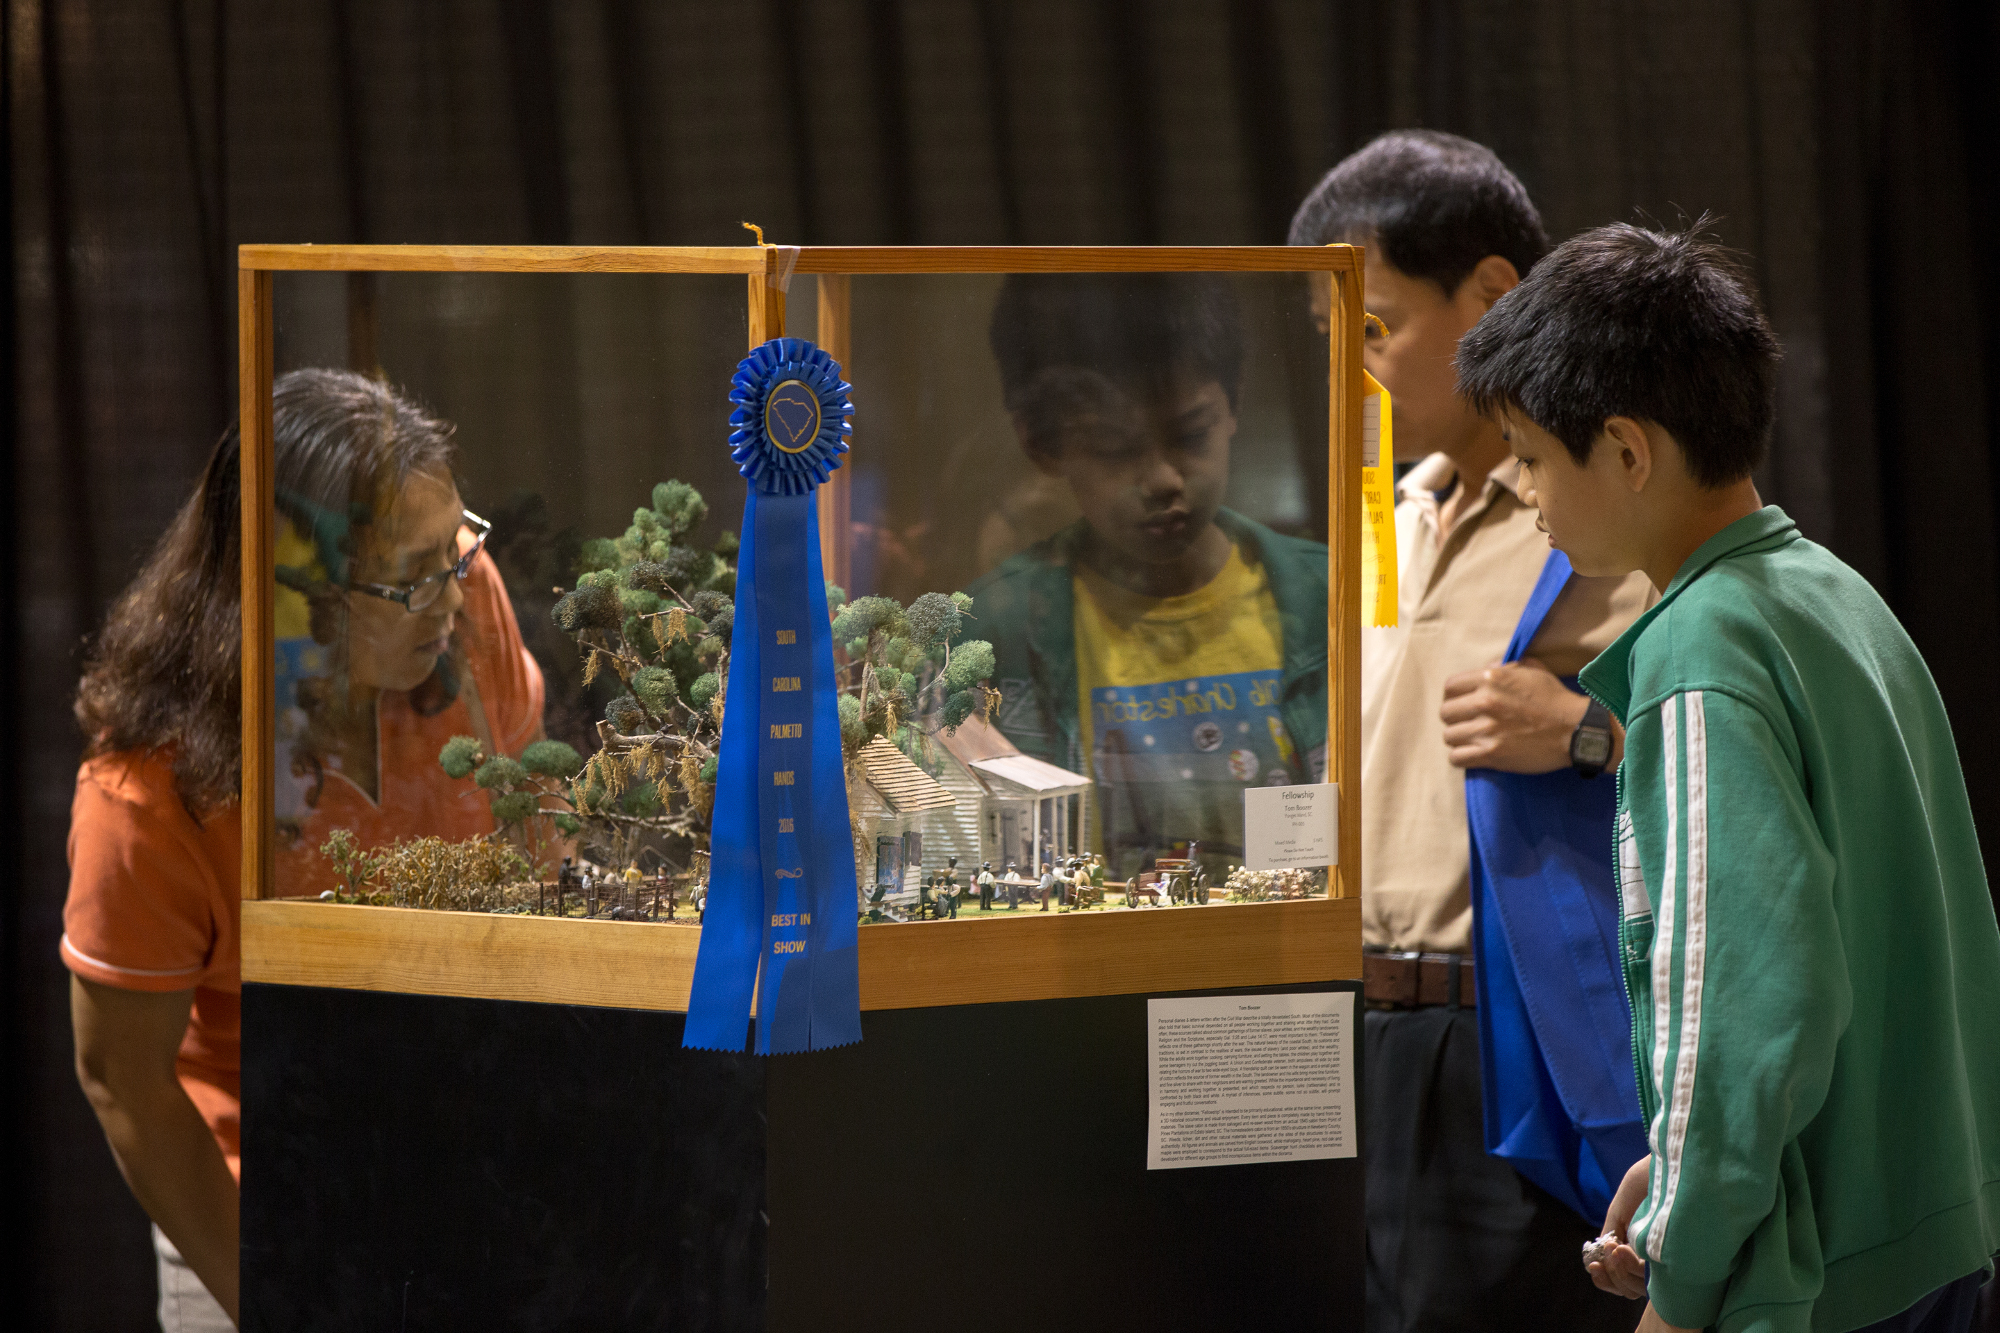 SC Palmetto Hands Fine Craft Competition & Exhibition winners announced